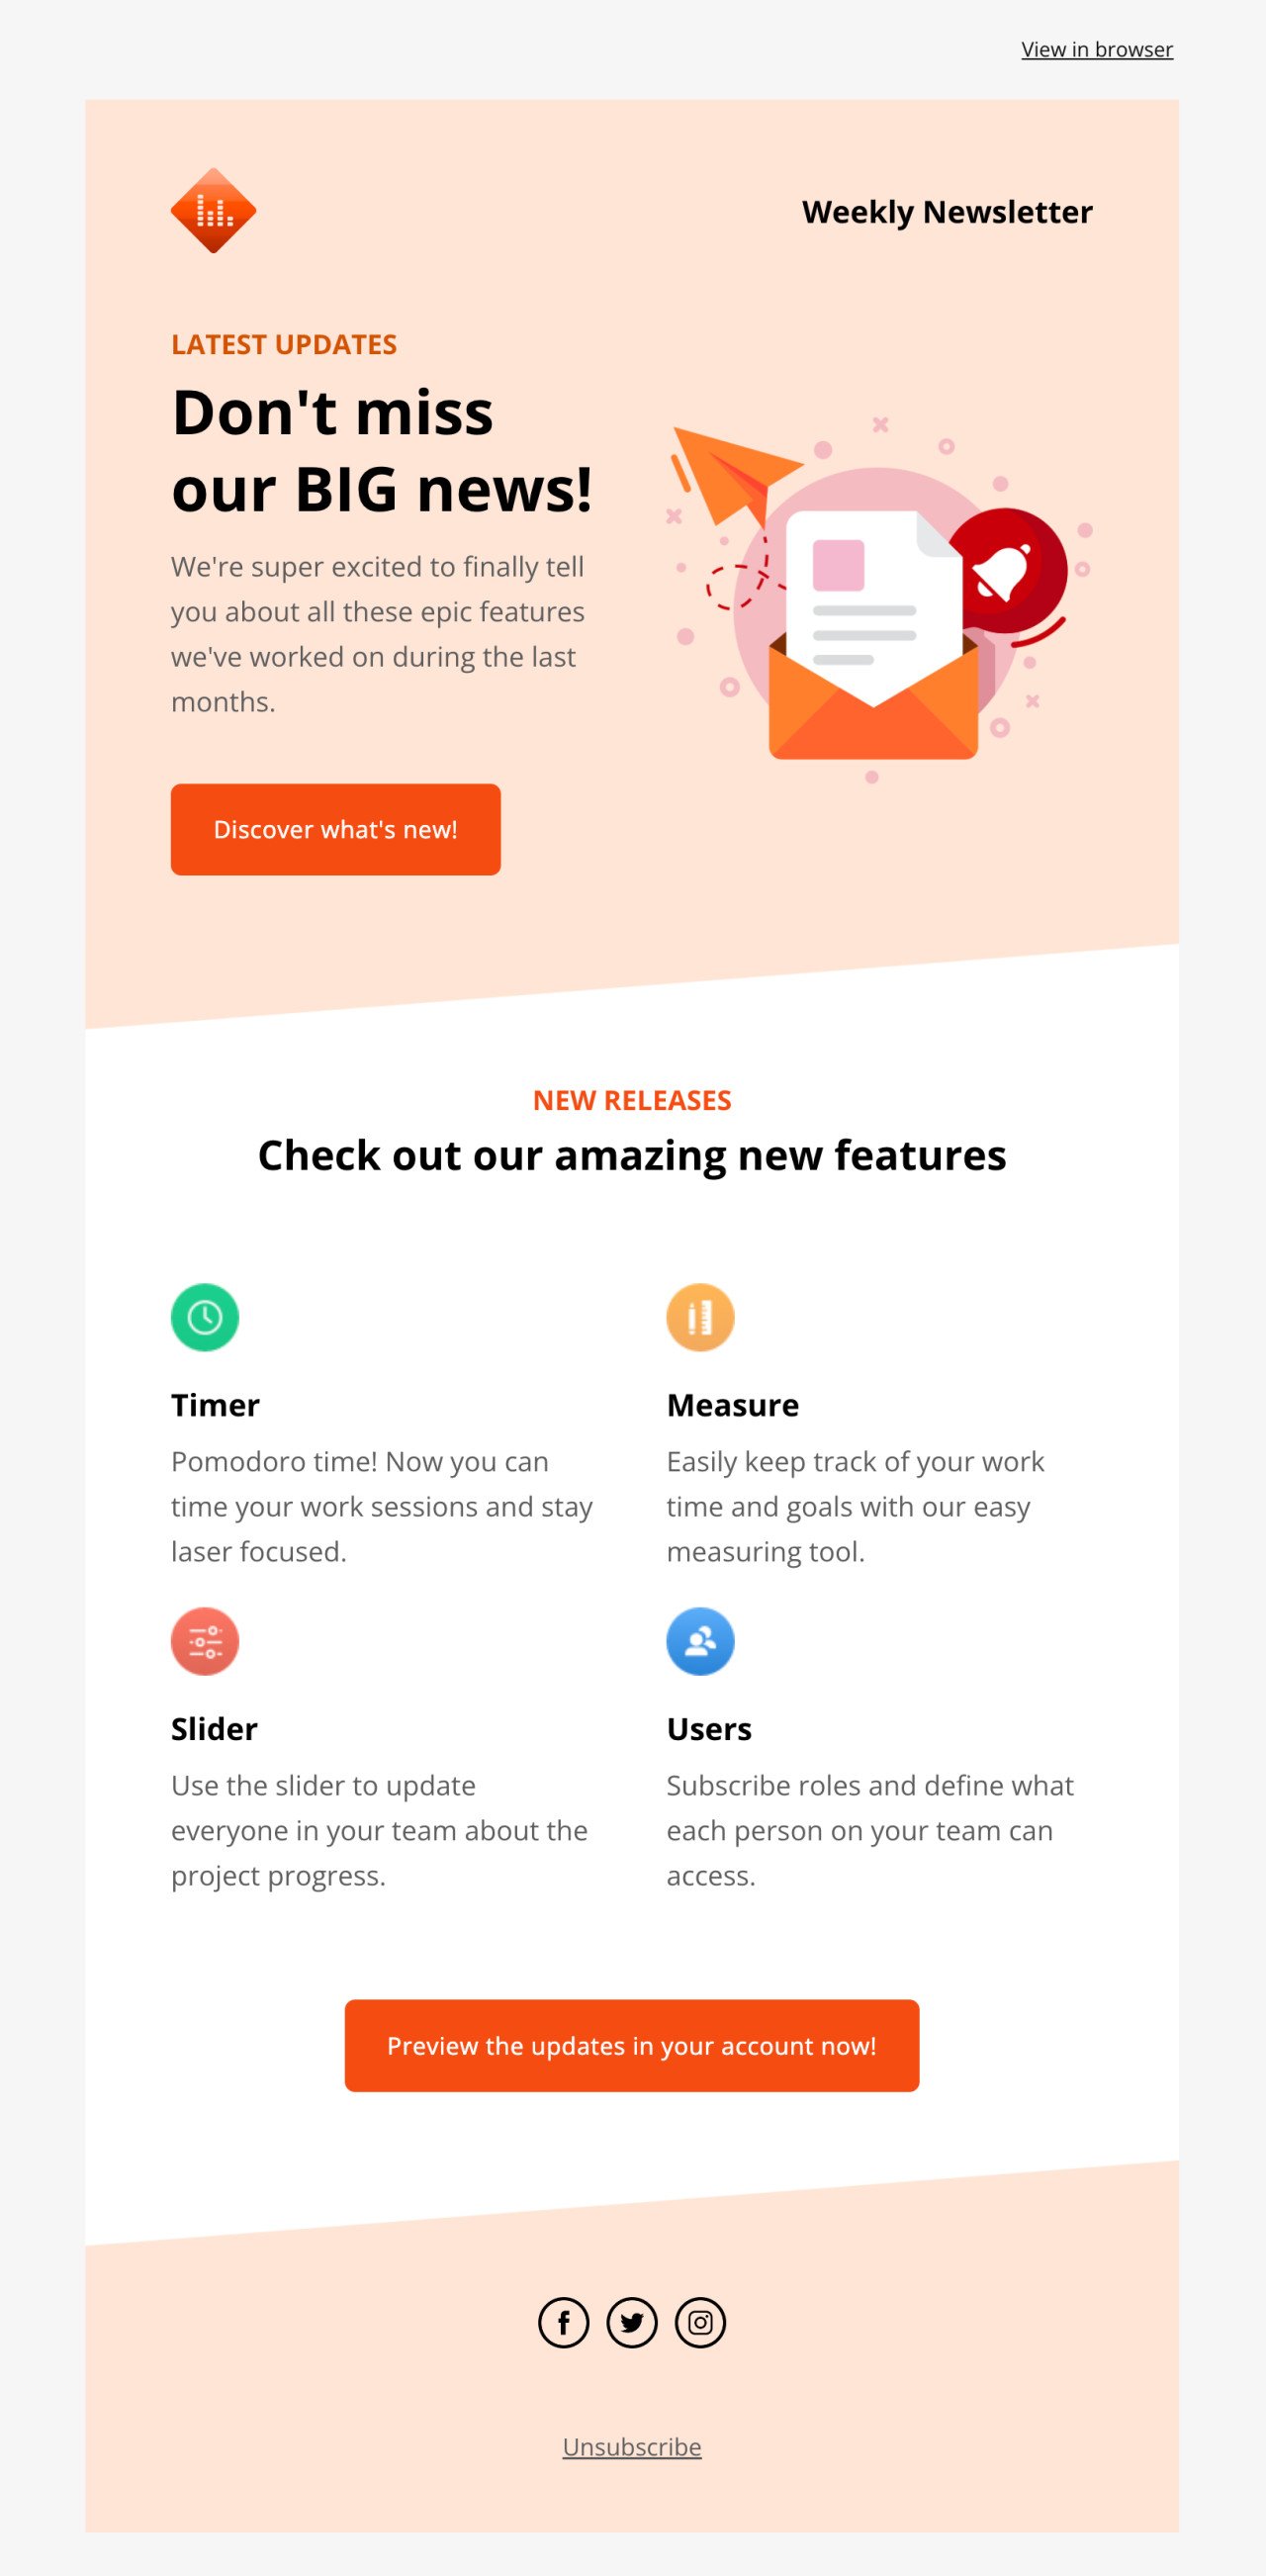 Product updates template - Made by MailerLite